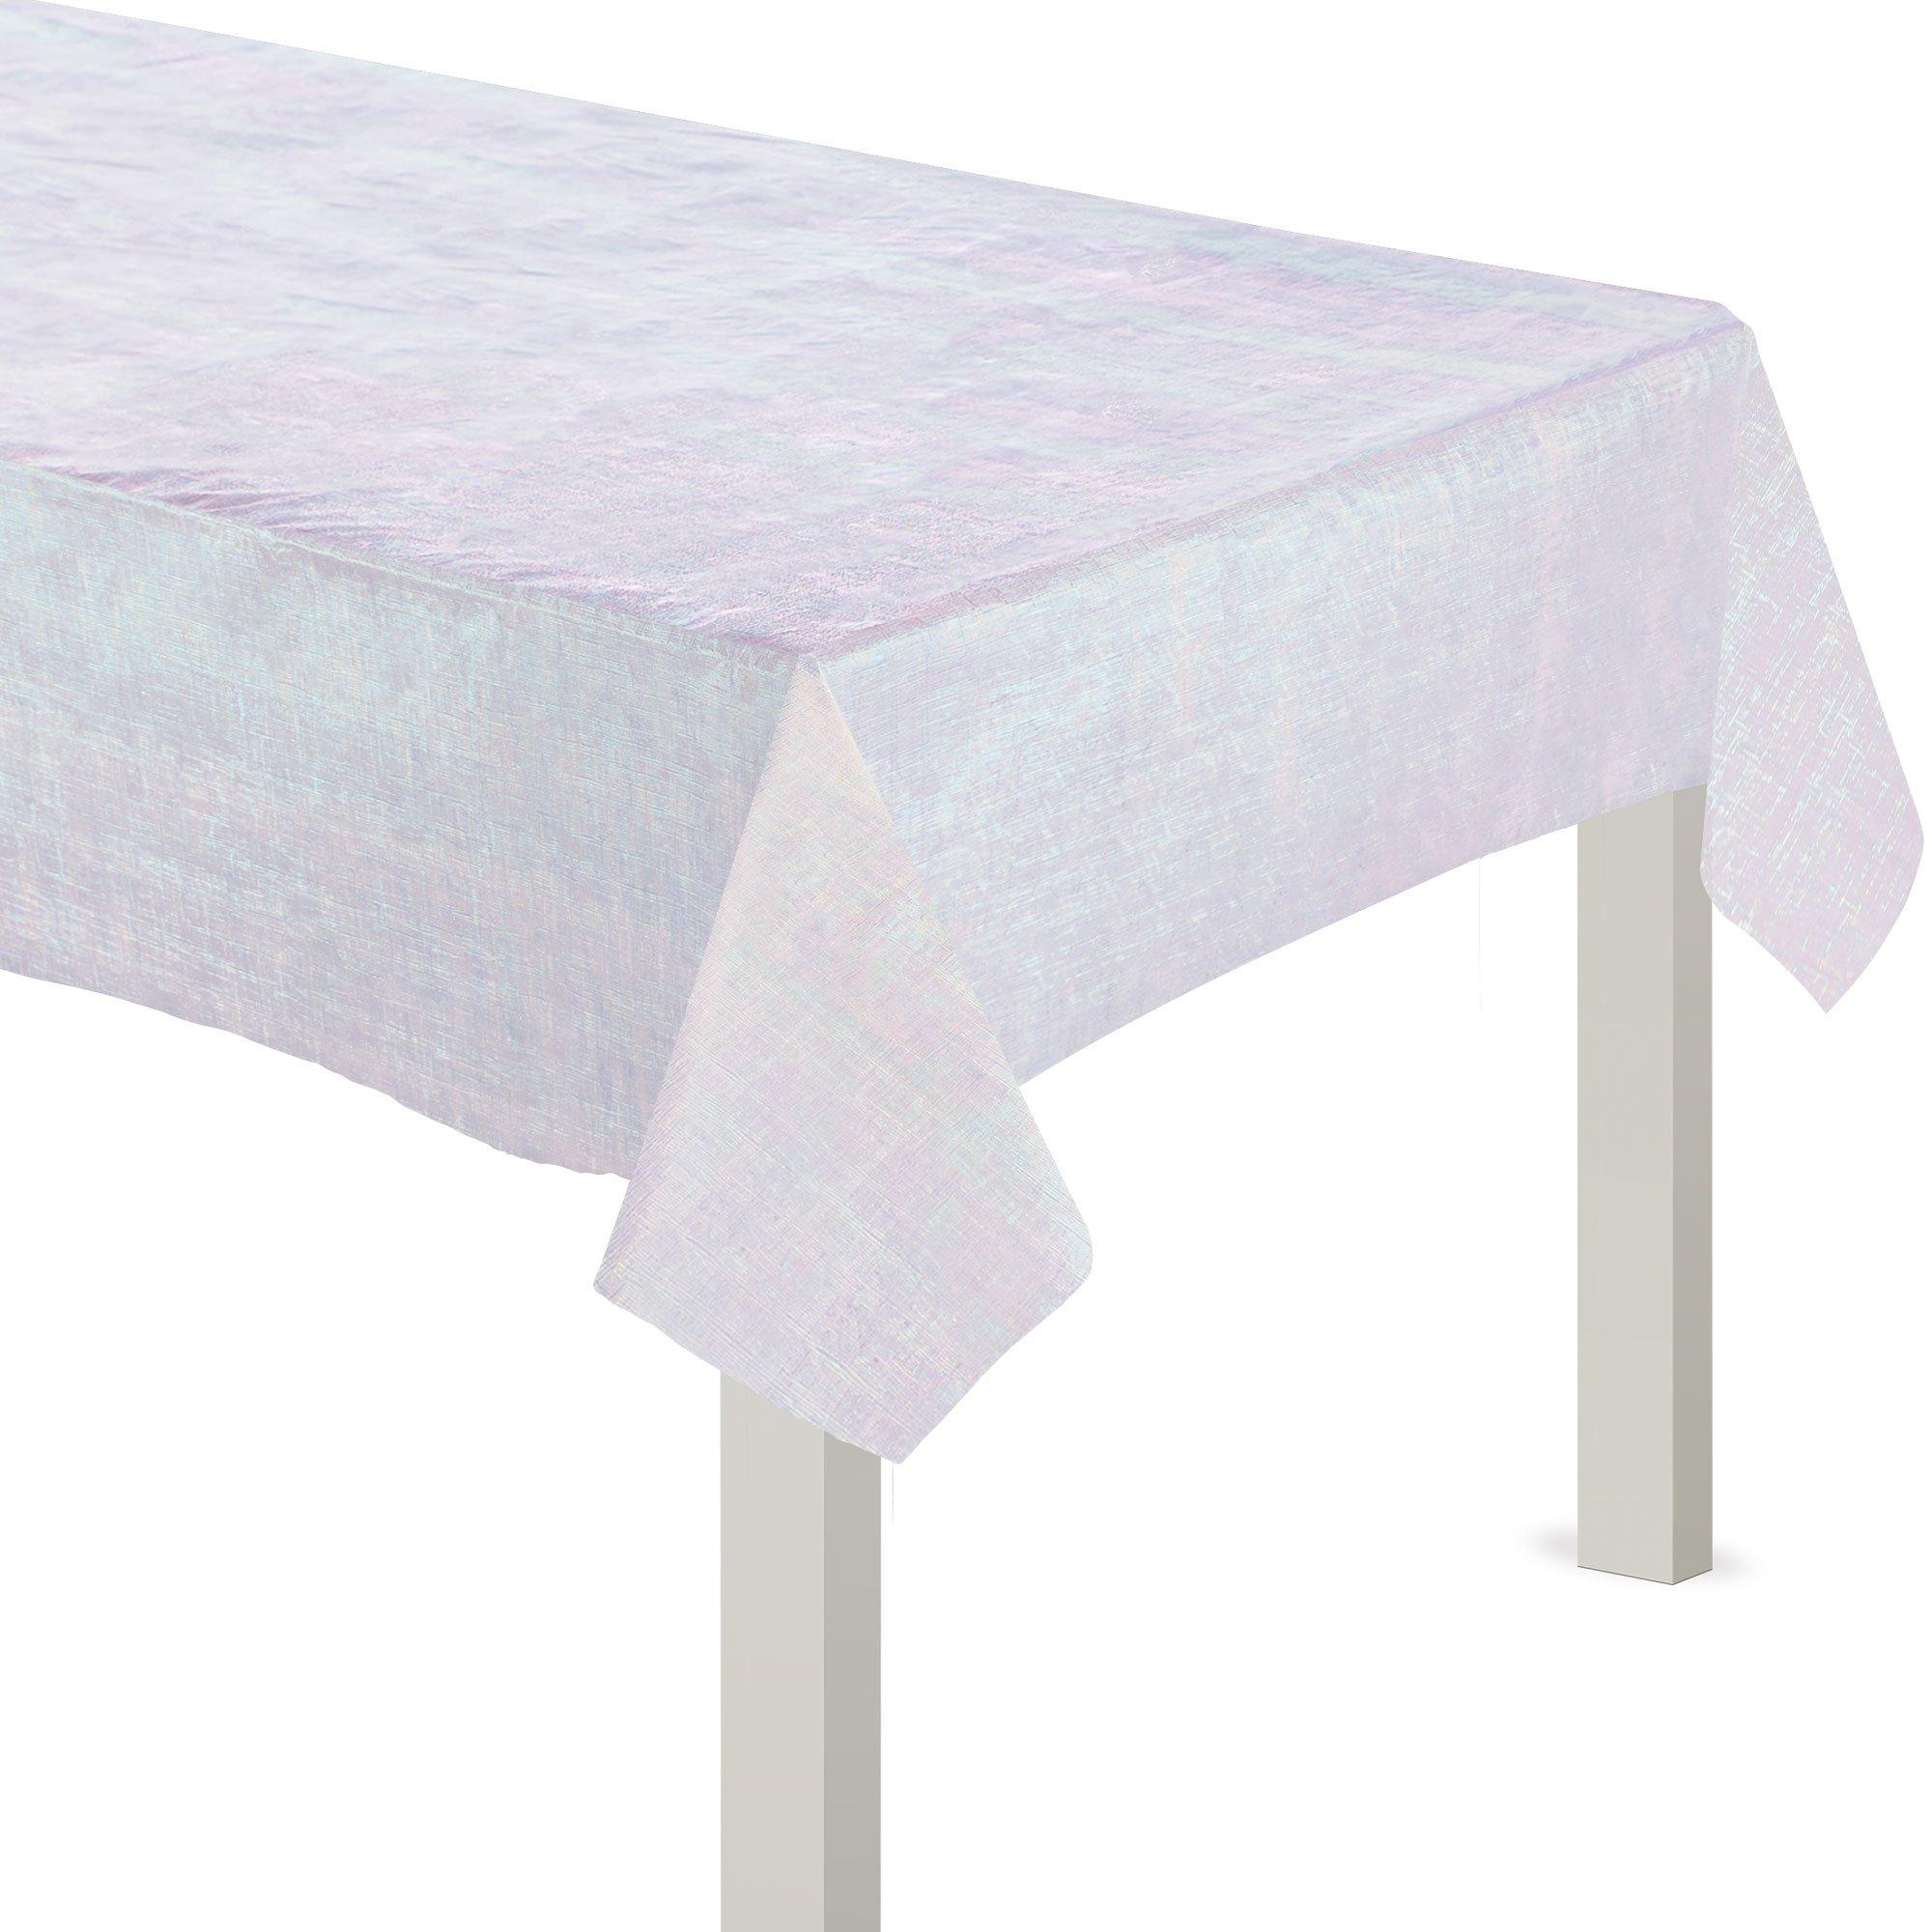 Pink Iridescent Paper & Plastic Table Cover, 54in x 102in - Size